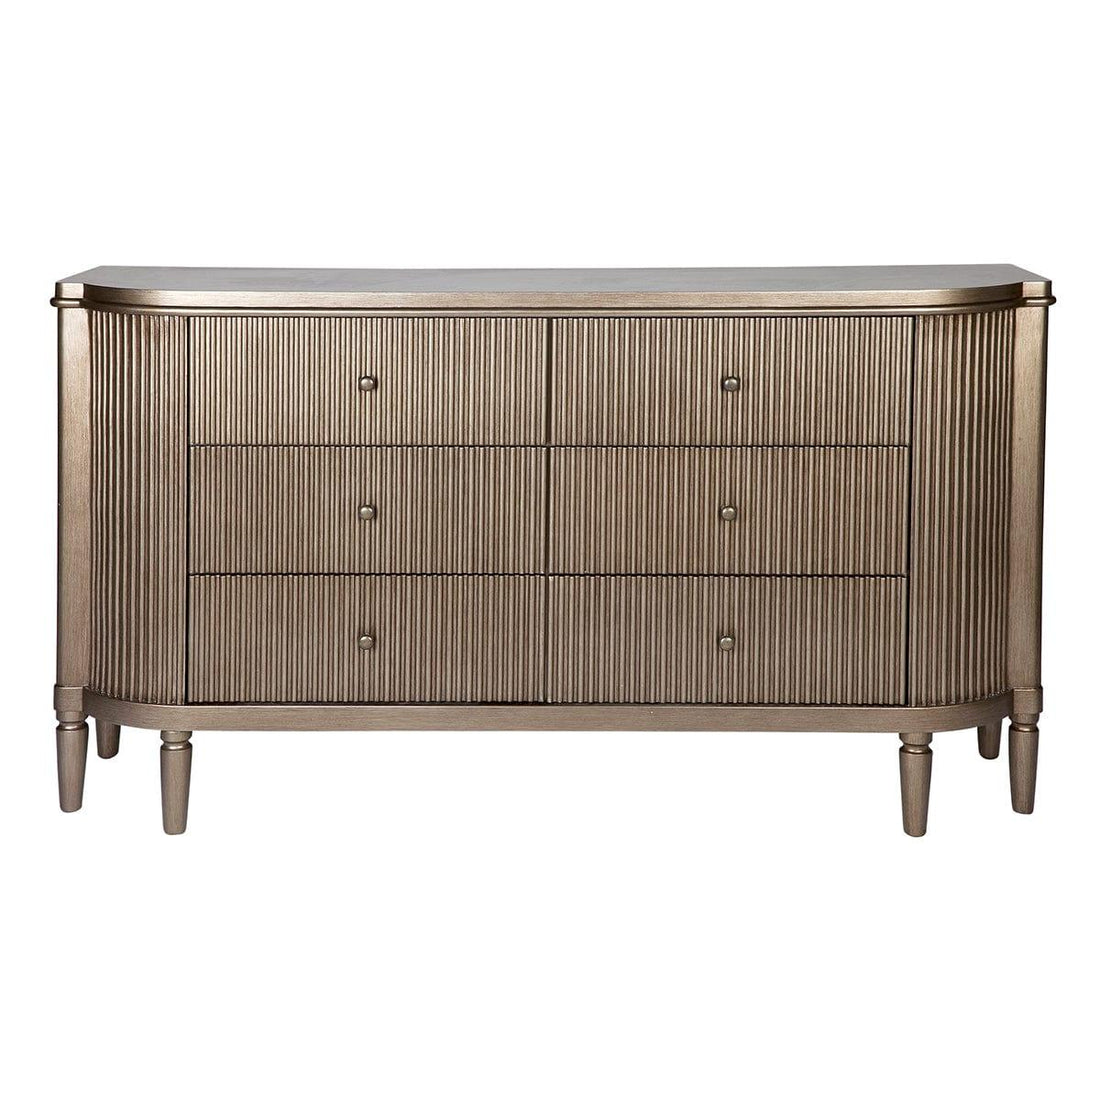 House Journey Arielle 6 Drawer Chest - Antique Gold